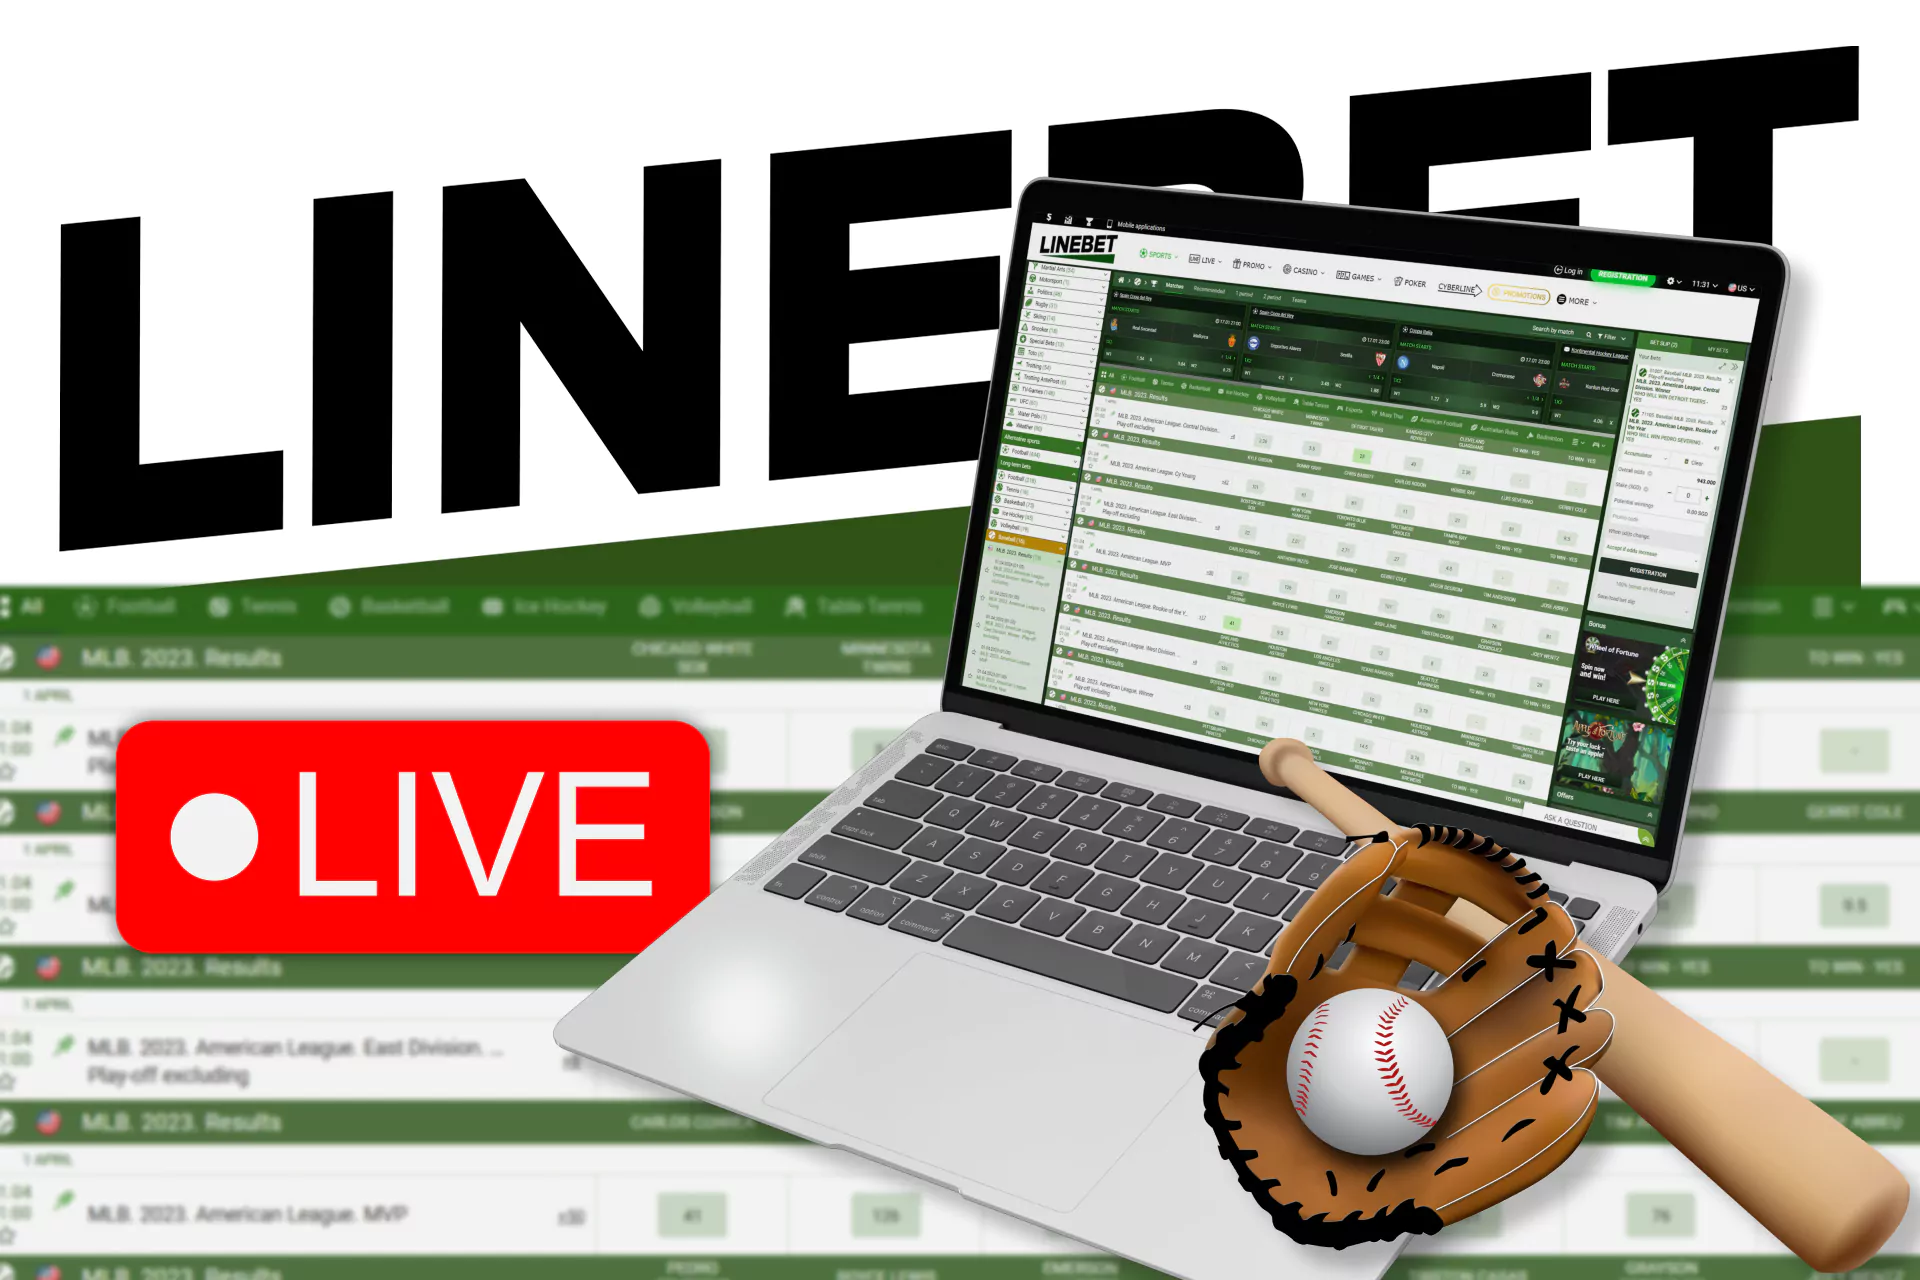 In Linebet, place bets on baseball right during the live game.